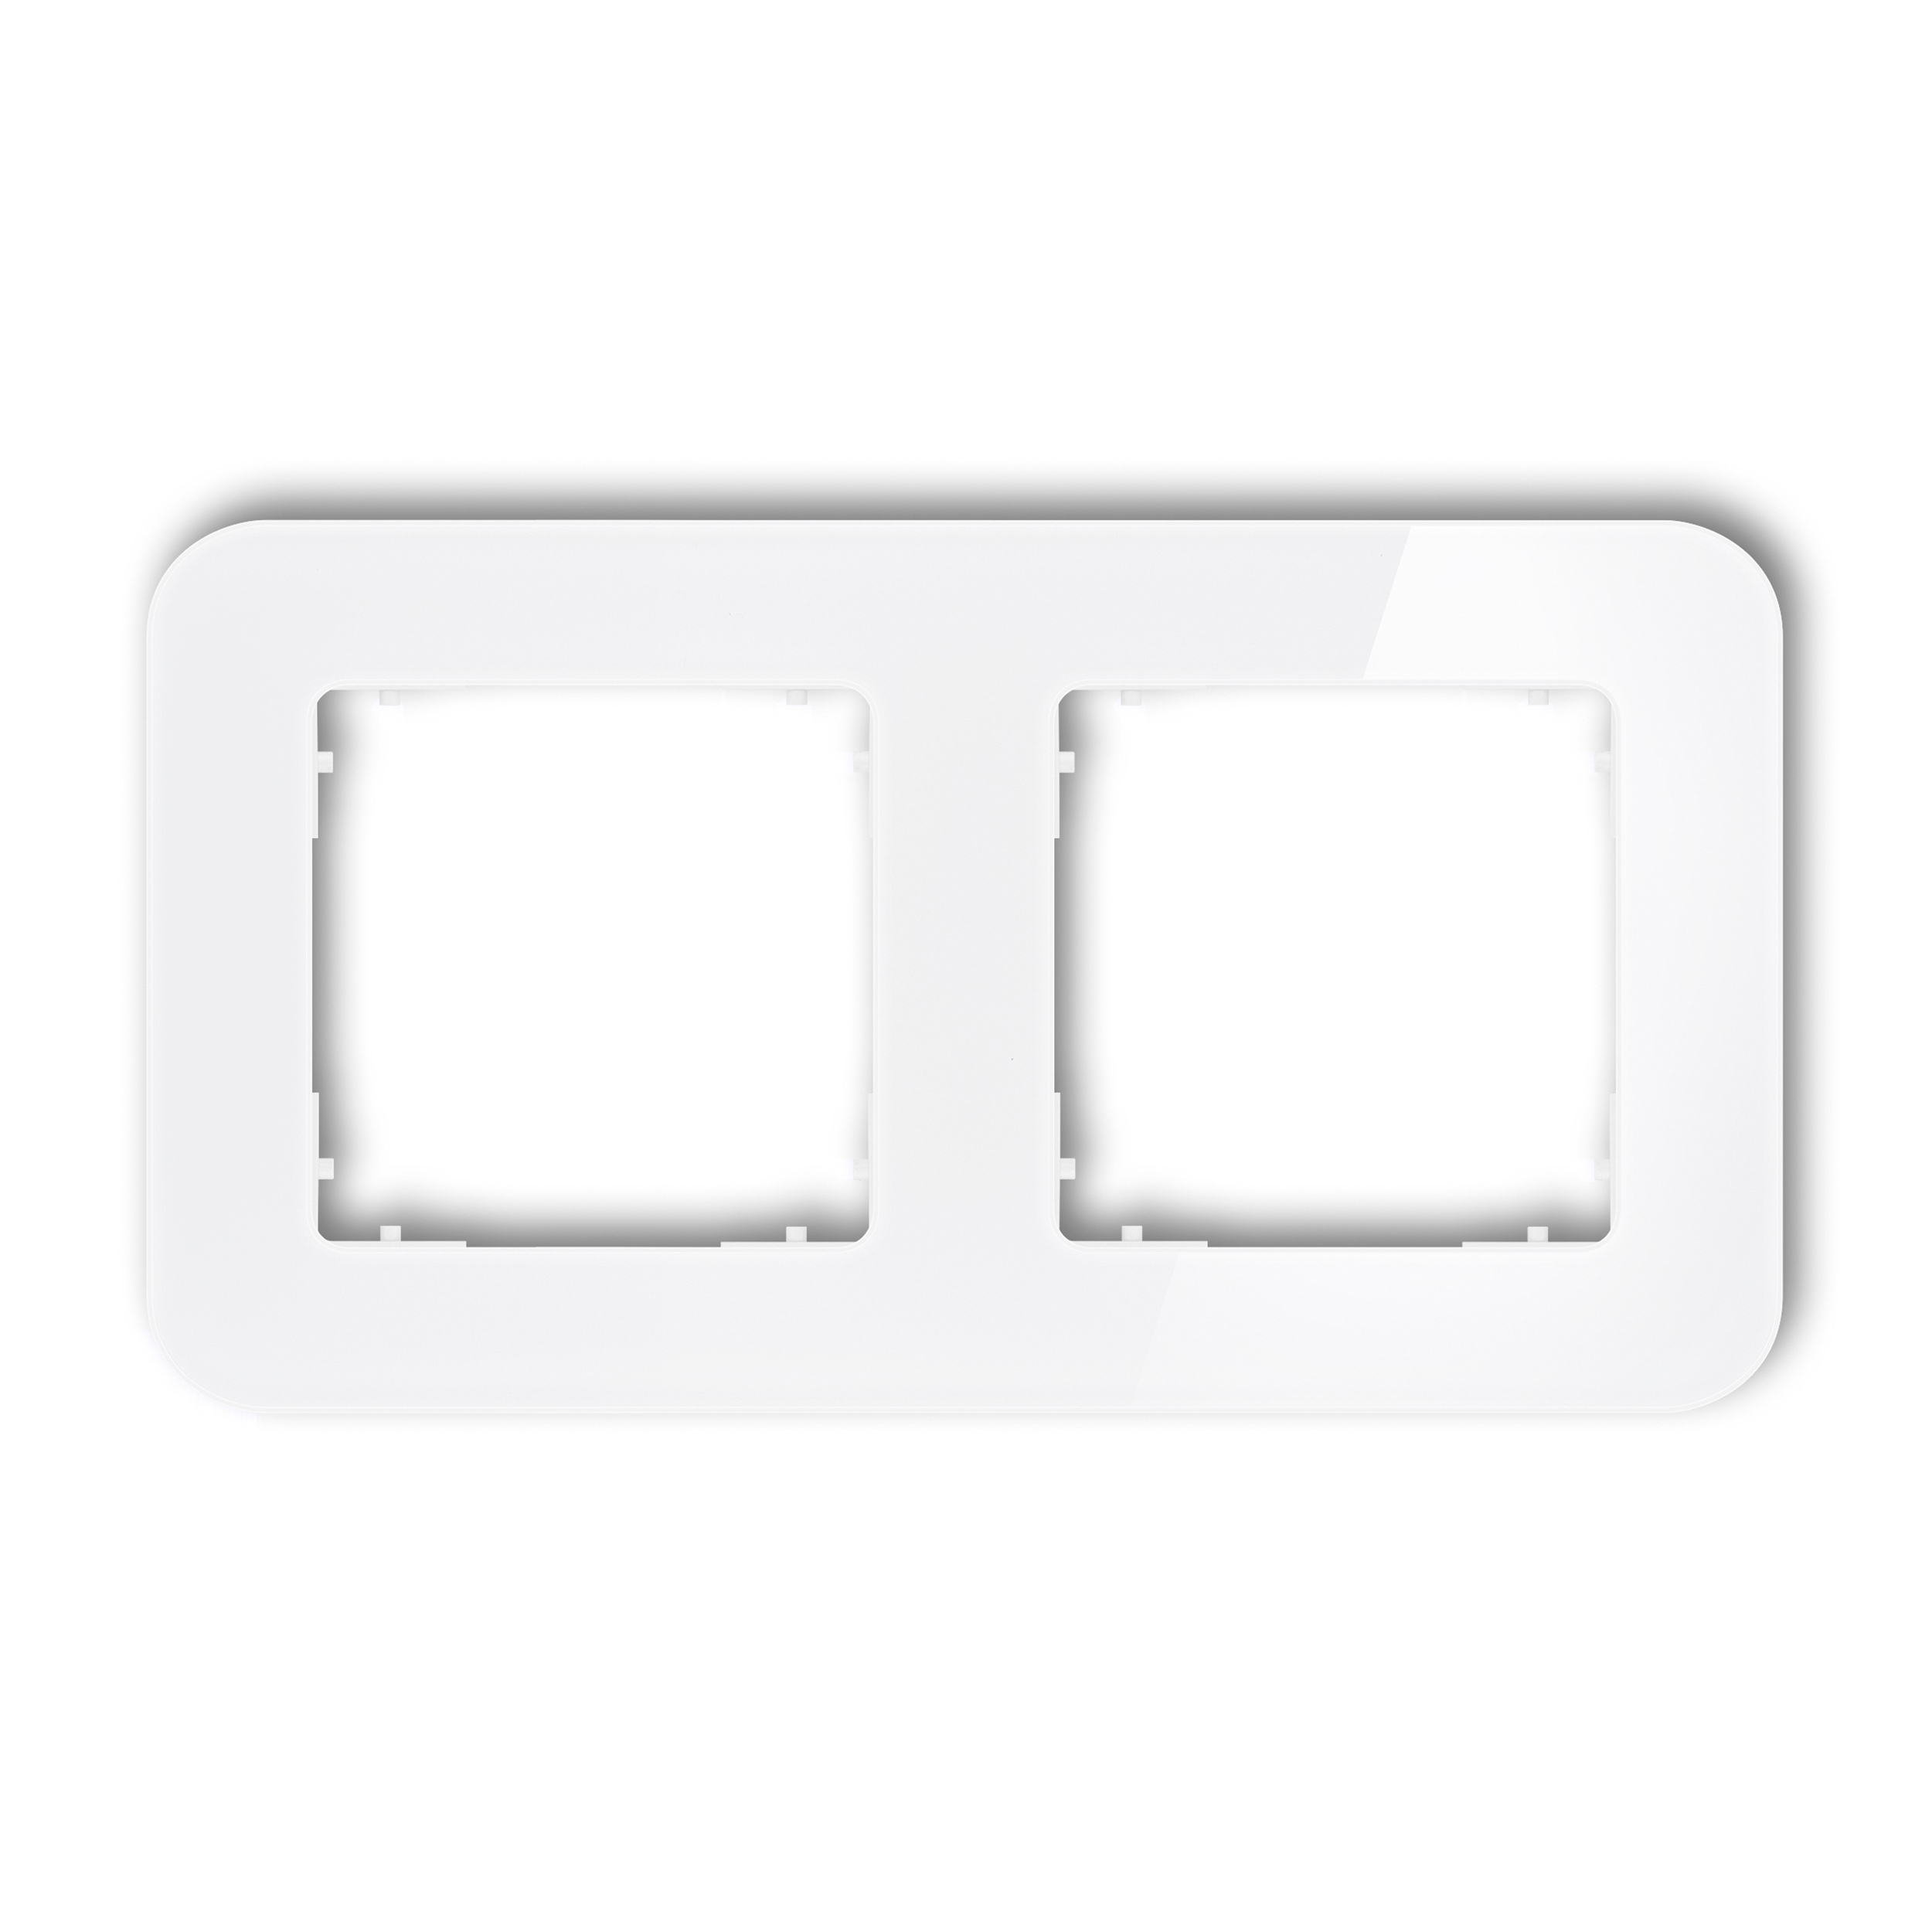 2-gang universal frame with rounded edges